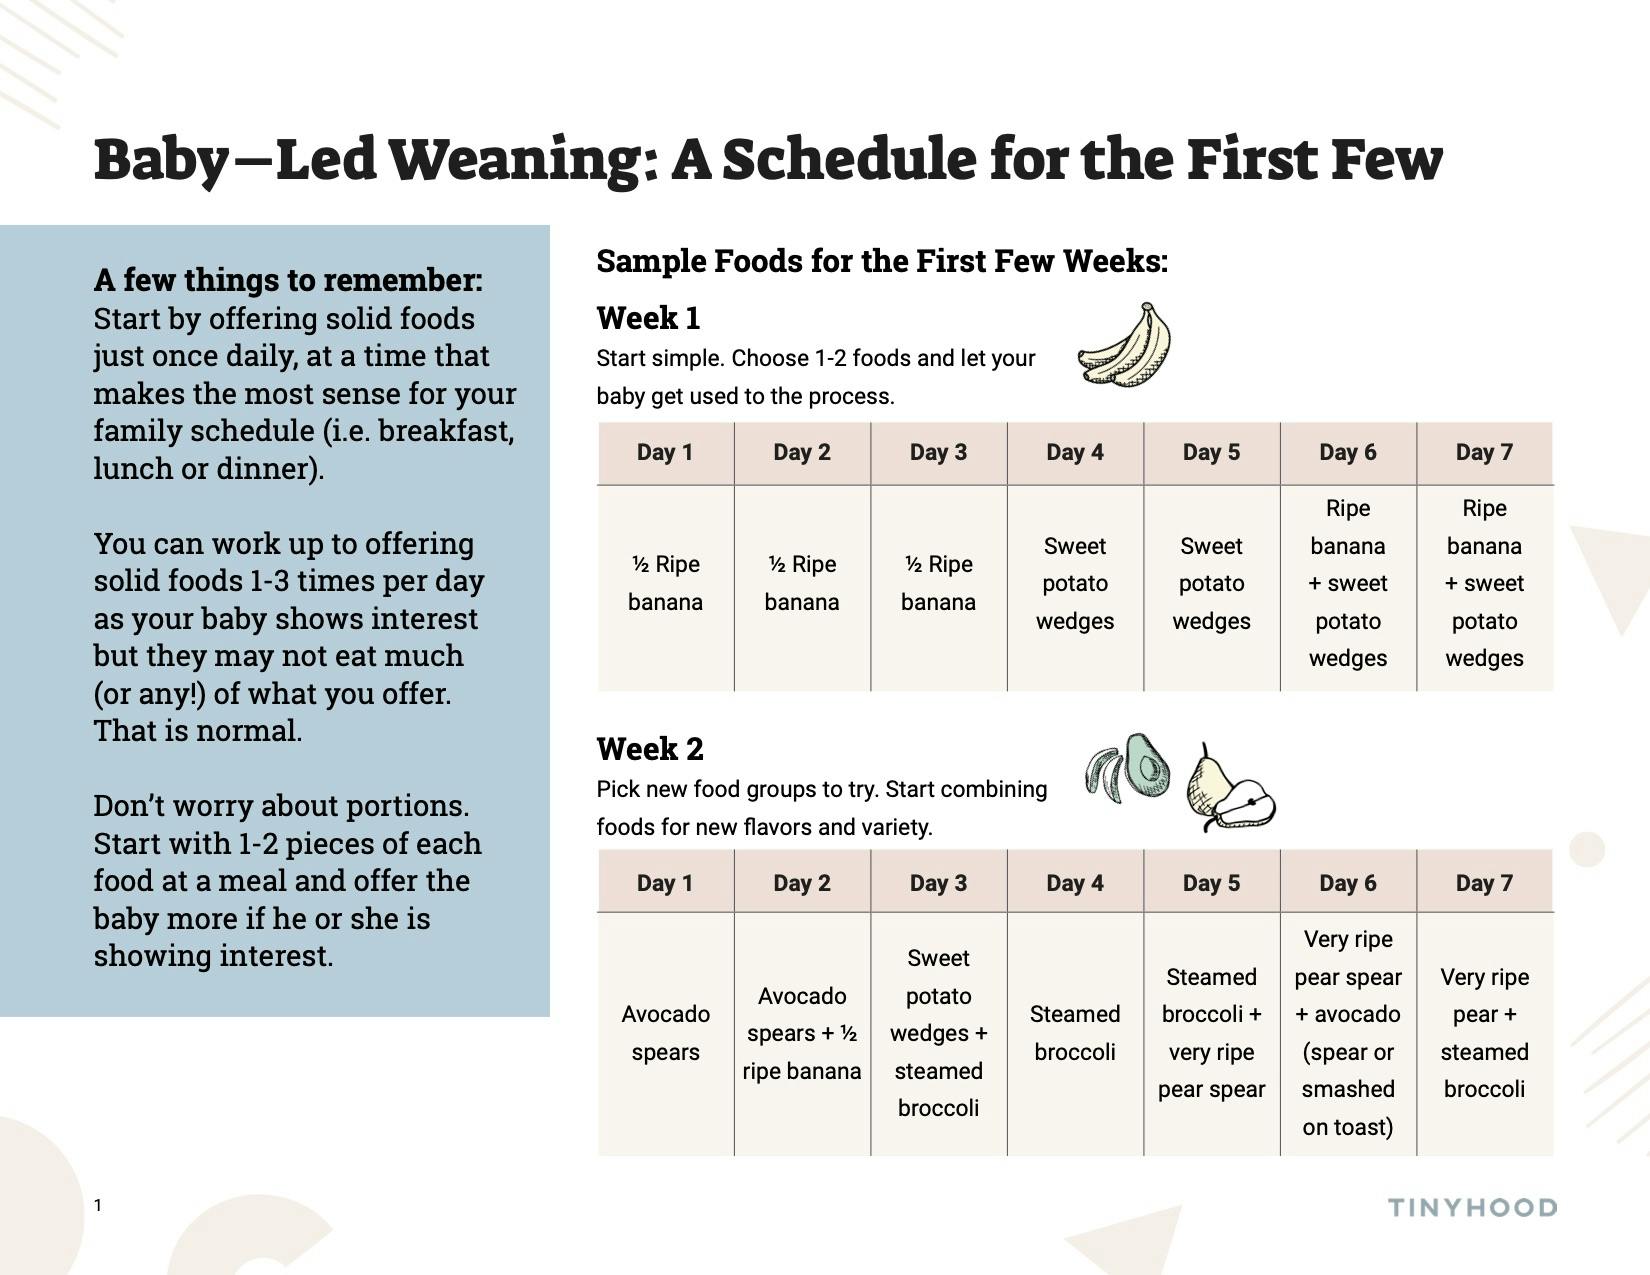 Preview image of Handout: Feeding Schedule for the First Few Weeks of BLW